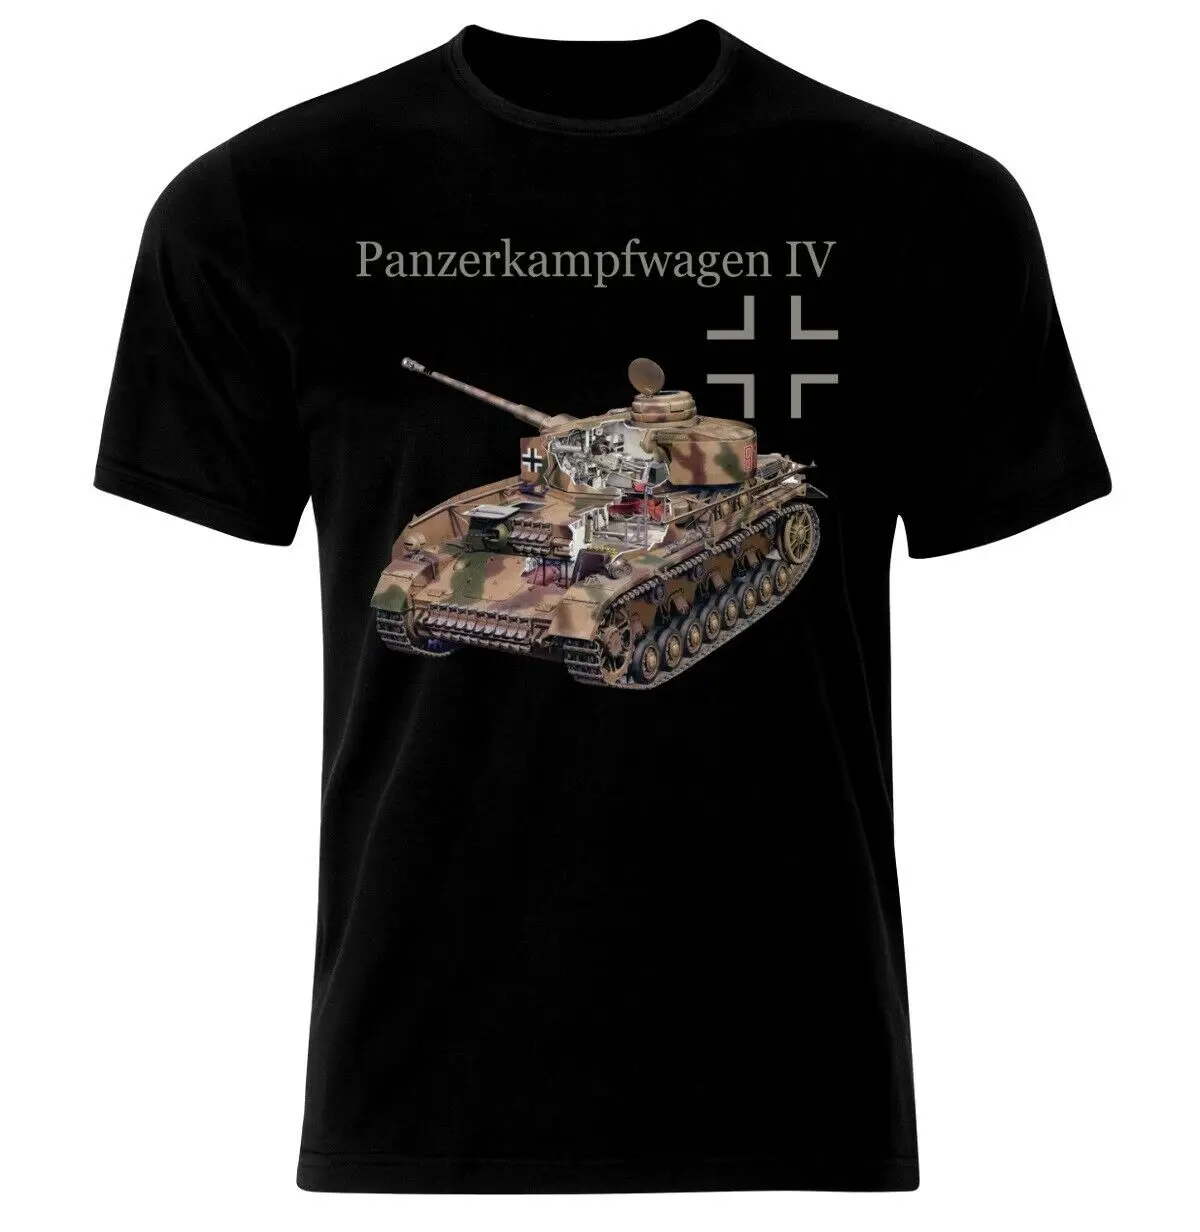 

Wehrmacht Panzer IV WWII German Military Armour Tank T-Shirt 100% Cotton O-Neck Short Sleeve Casual Mens T-shirt Size S-3XL